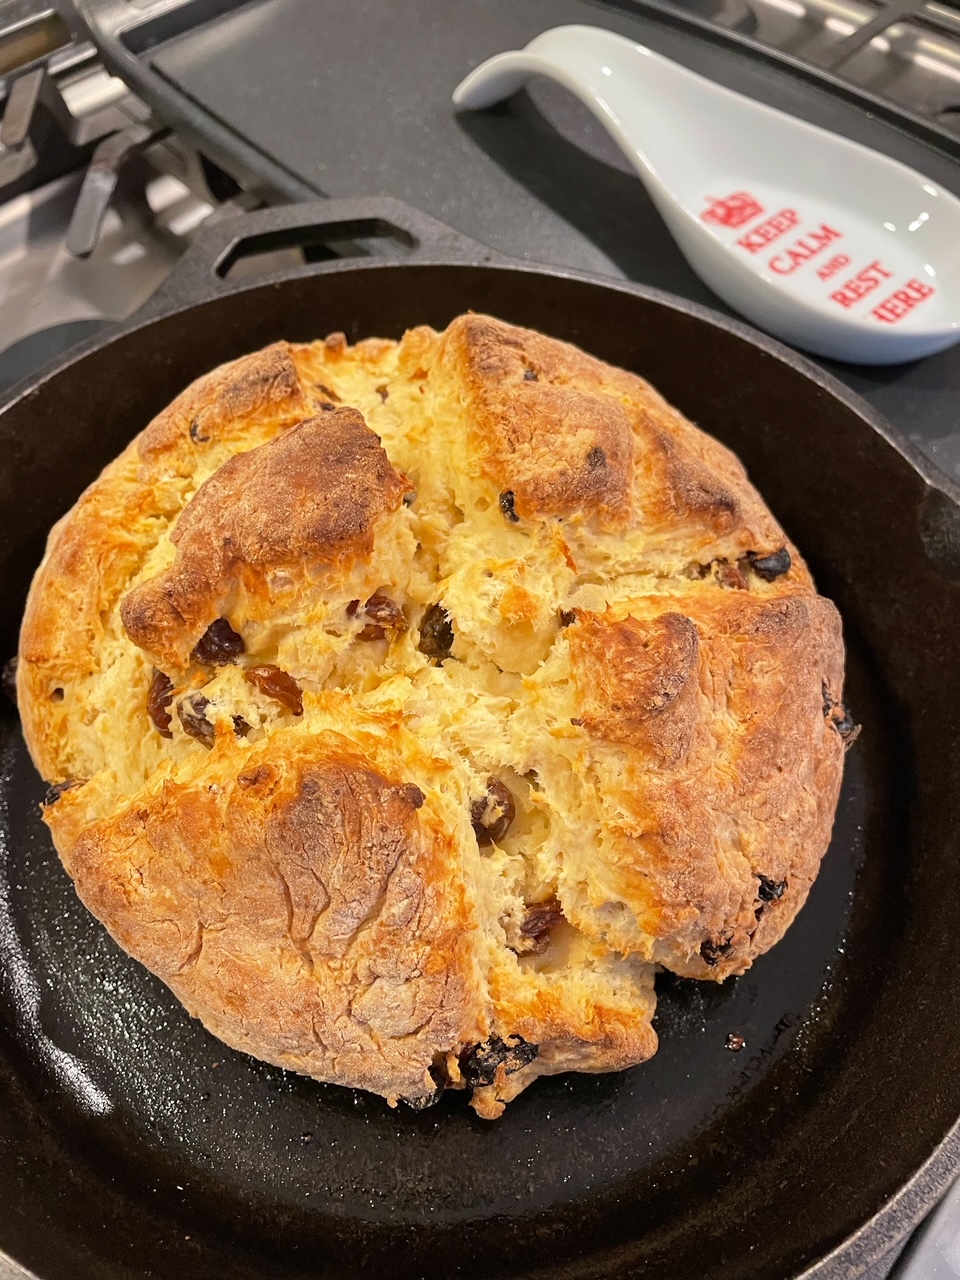 The finished Easy Irish Soda Bread loaf in a cast-iron pan